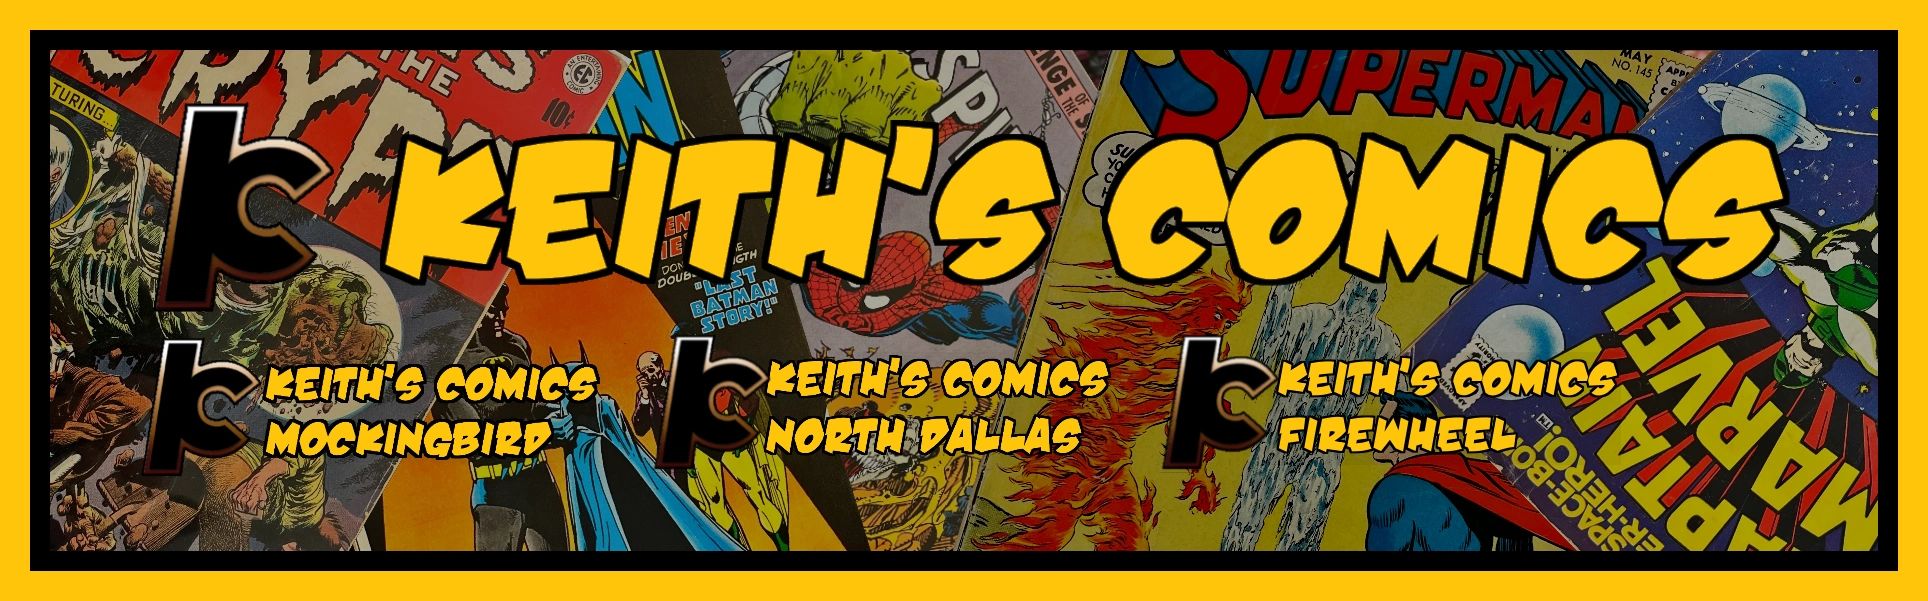 Really cool banner featuring store locations and the title of the business, Keith's Comics!